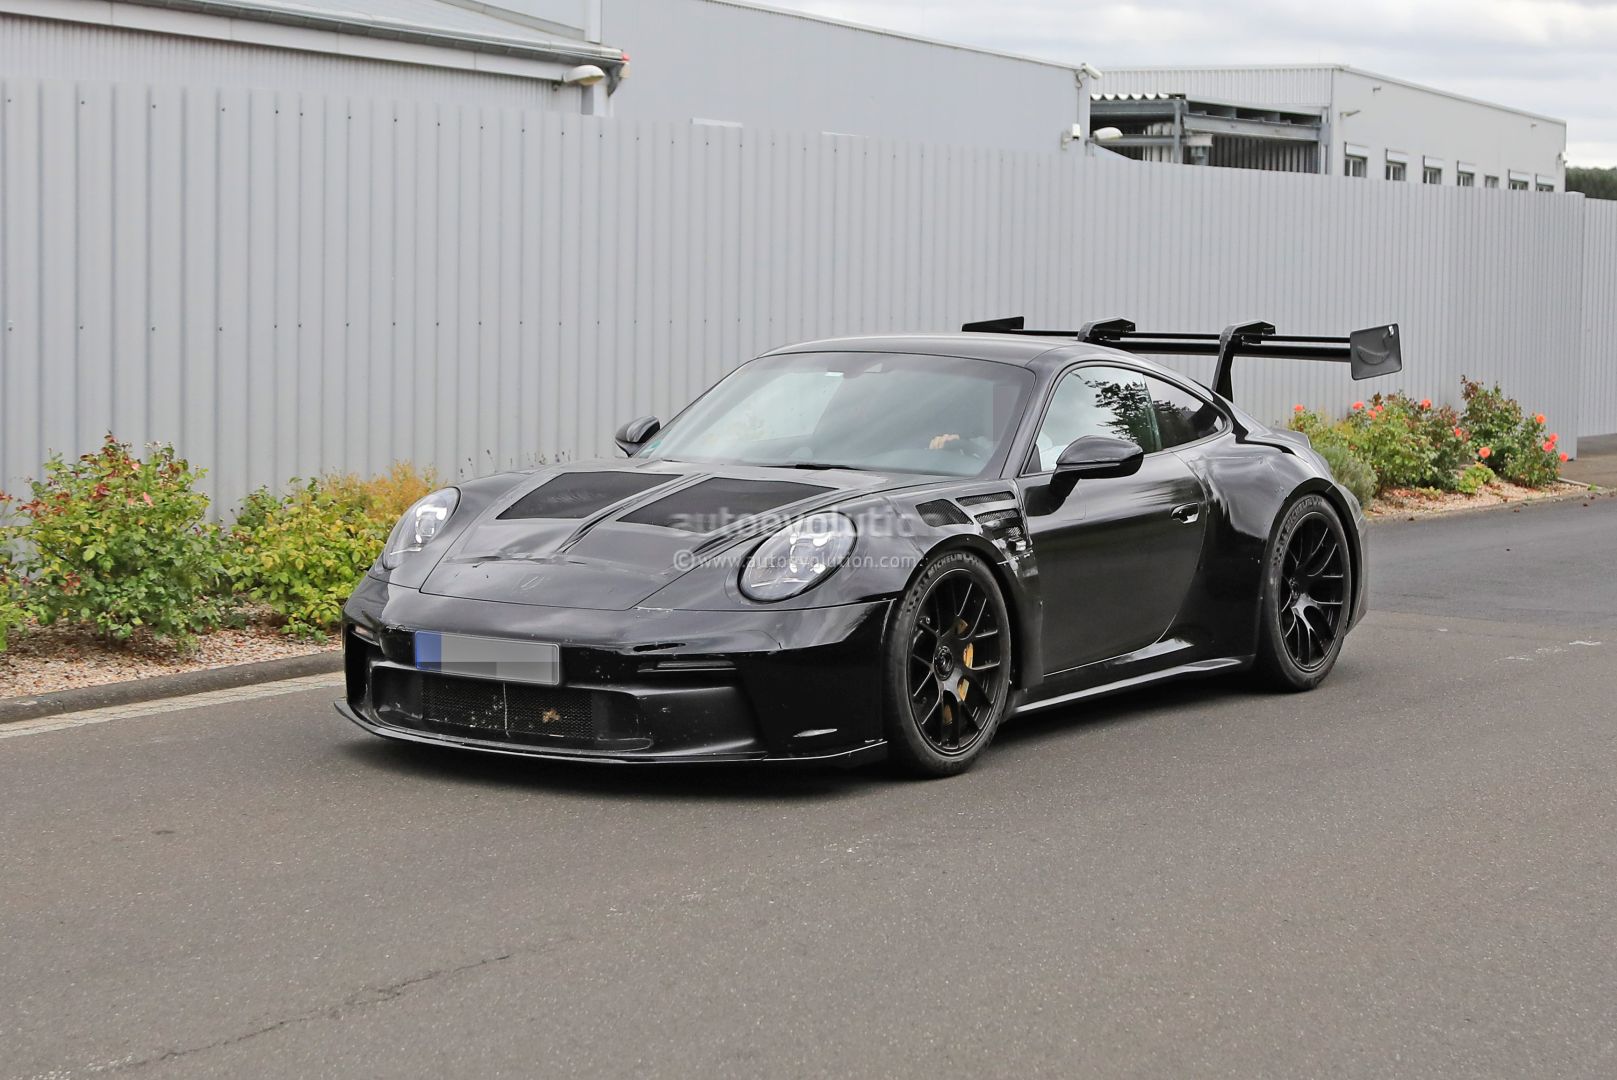 New 992 Porsche 911 GT3 RS Spotted in Traffic, the Wing Game Is Insane.